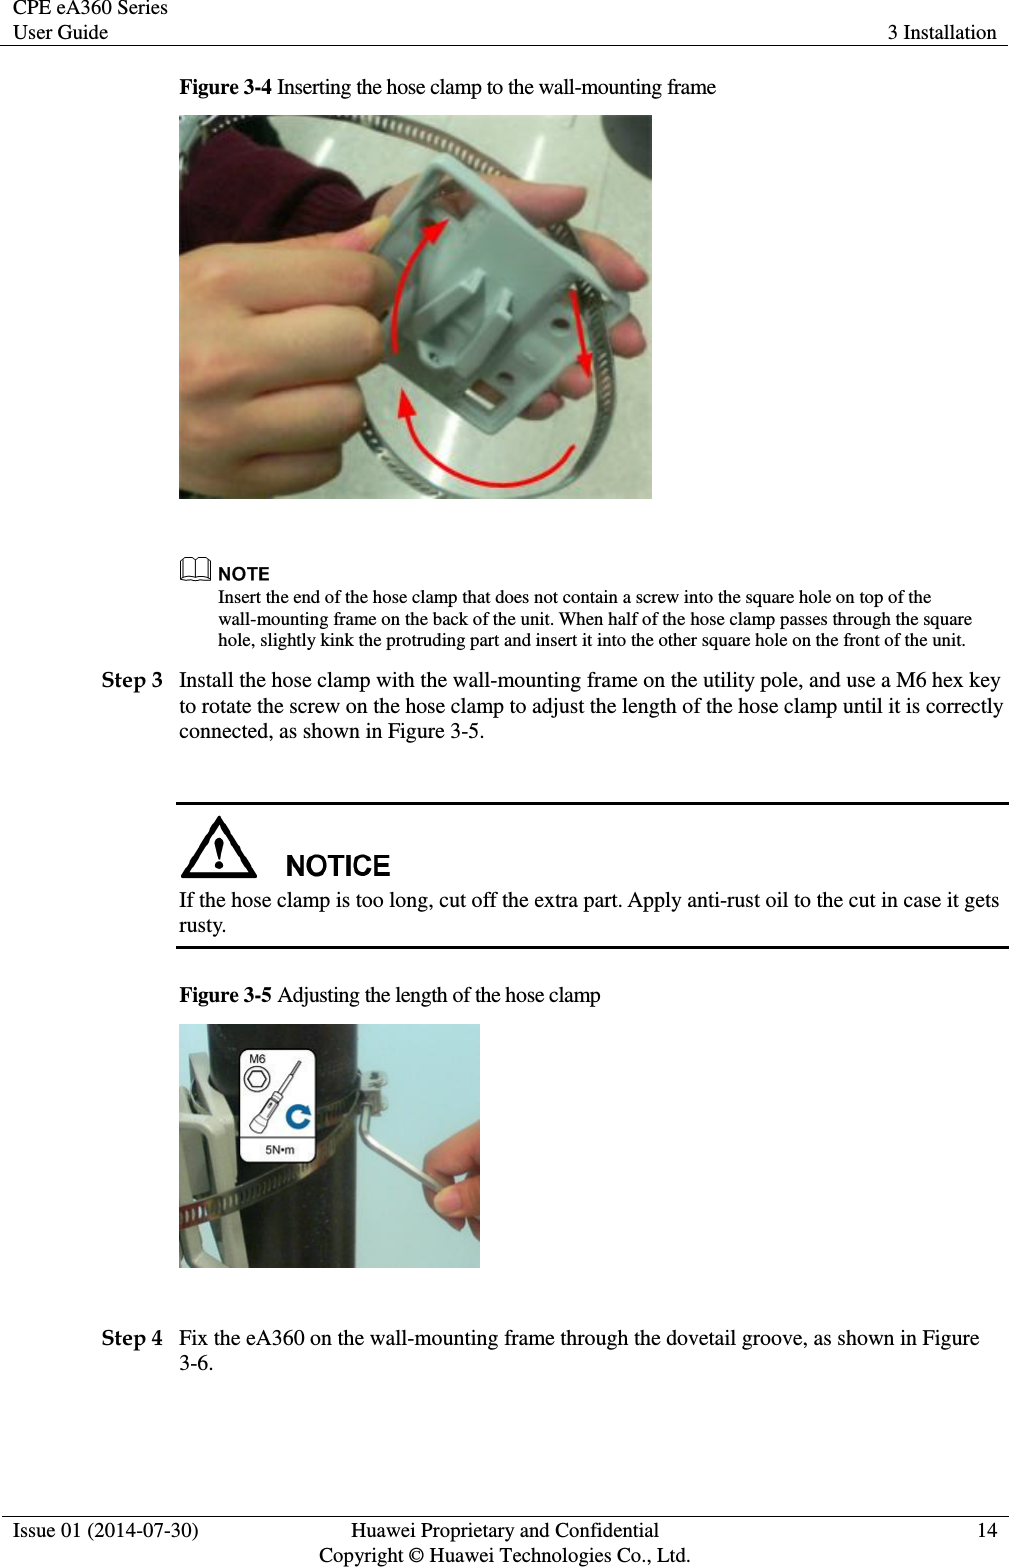 CPE eA360 Series User Guide 3 Installation  Issue 01 (2014-07-30) Huawei Proprietary and Confidential                                     Copyright © Huawei Technologies Co., Ltd. 14  Figure 3-4 Inserting the hose clamp to the wall-mounting frame    Insert the end of the hose clamp that does not contain a screw into the square hole on top of the wall-mounting frame on the back of the unit. When half of the hose clamp passes through the square hole, slightly kink the protruding part and insert it into the other square hole on the front of the unit. Step 3 Install the hose clamp with the wall-mounting frame on the utility pole, and use a M6 hex key to rotate the screw on the hose clamp to adjust the length of the hose clamp until it is correctly connected, as shown in Figure 3-5.   If the hose clamp is too long, cut off the extra part. Apply anti-rust oil to the cut in case it gets rusty.     Figure 3-5 Adjusting the length of the hose clamp   Step 4 Fix the eA360 on the wall-mounting frame through the dovetail groove, as shown in Figure 3-6. 